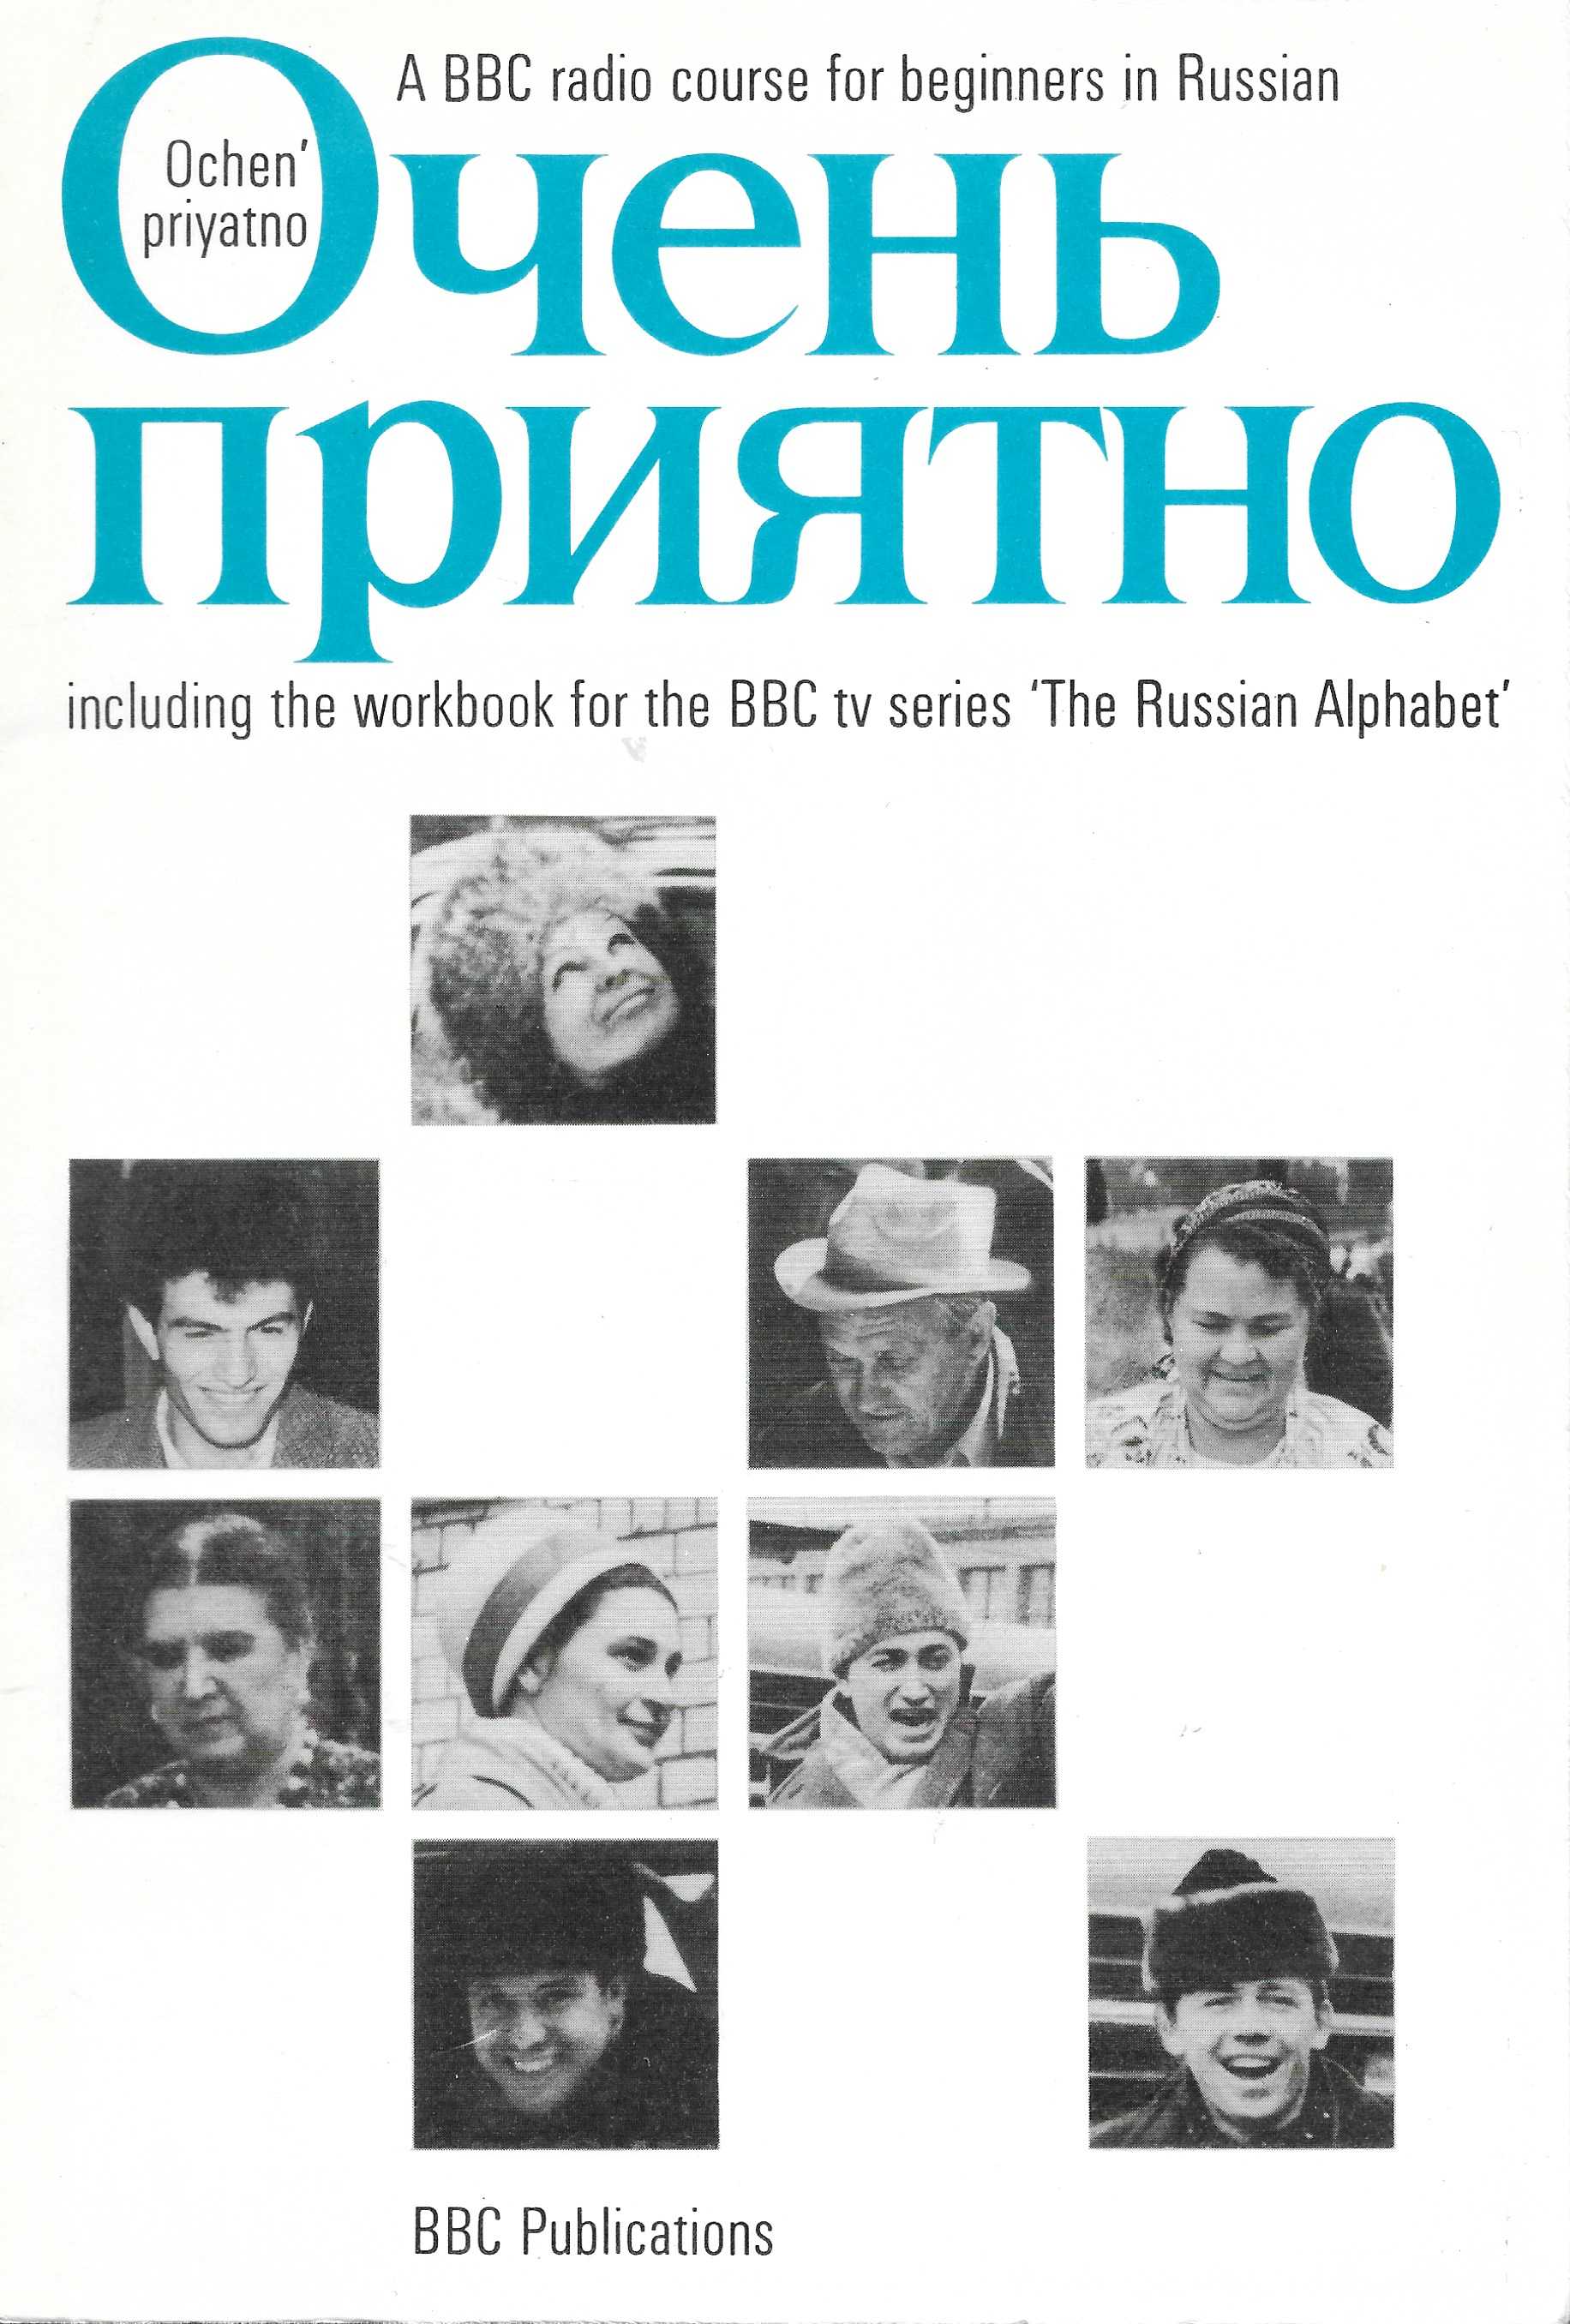 Picture of ISBN 0 563 10768 5 Ochen' priyatno - A BBC Radio course for beginners in Russian by artist Michael Frewin / Alla Braithwaite from the BBC books - Records and Tapes library